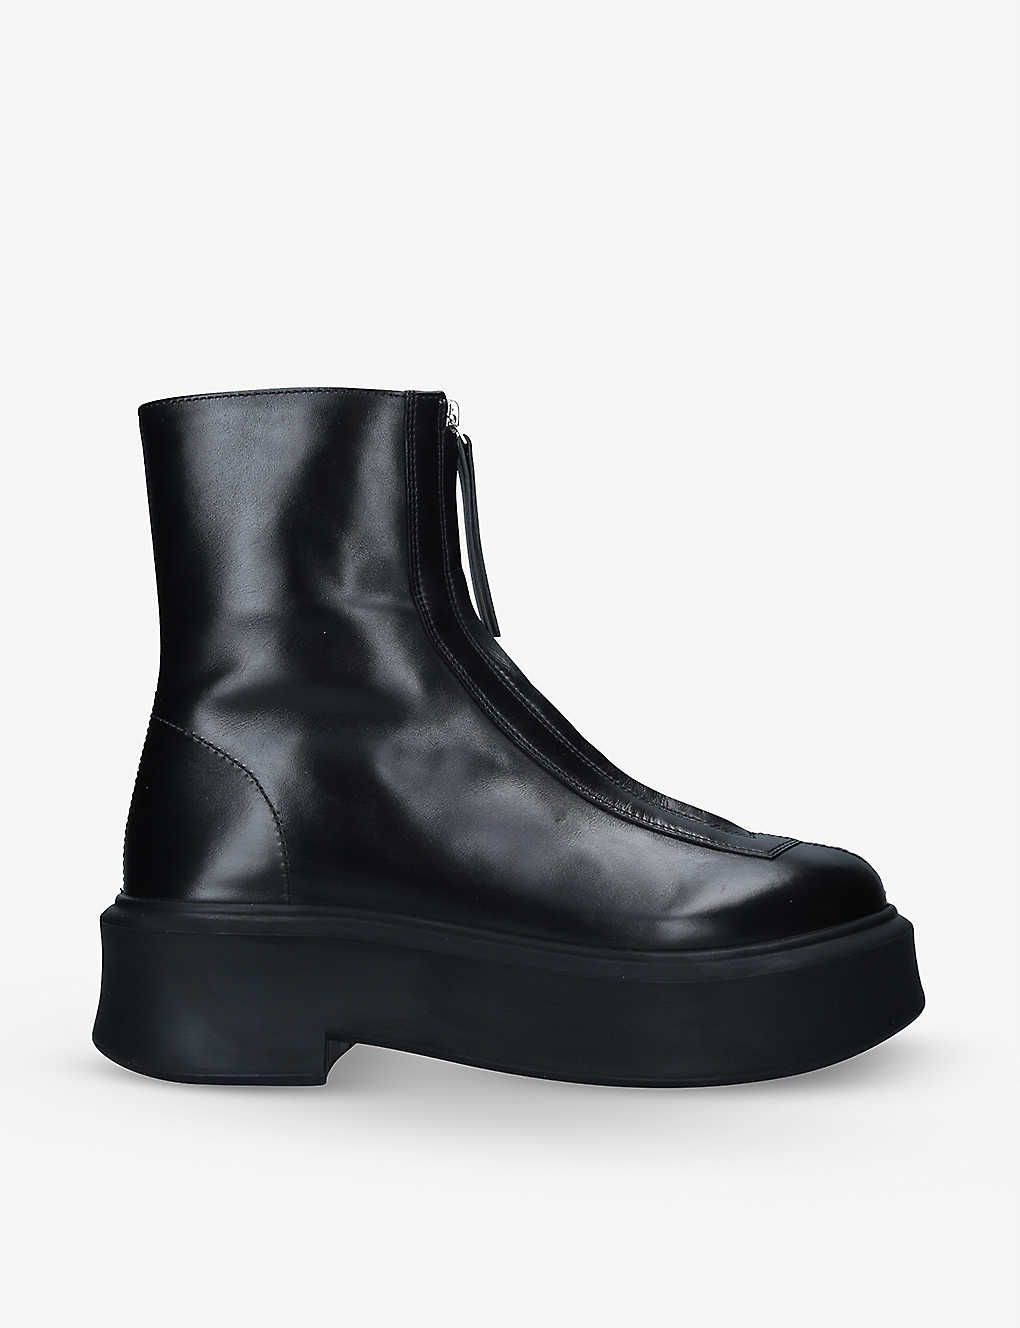 Zipped leather ankle boots | Selfridges